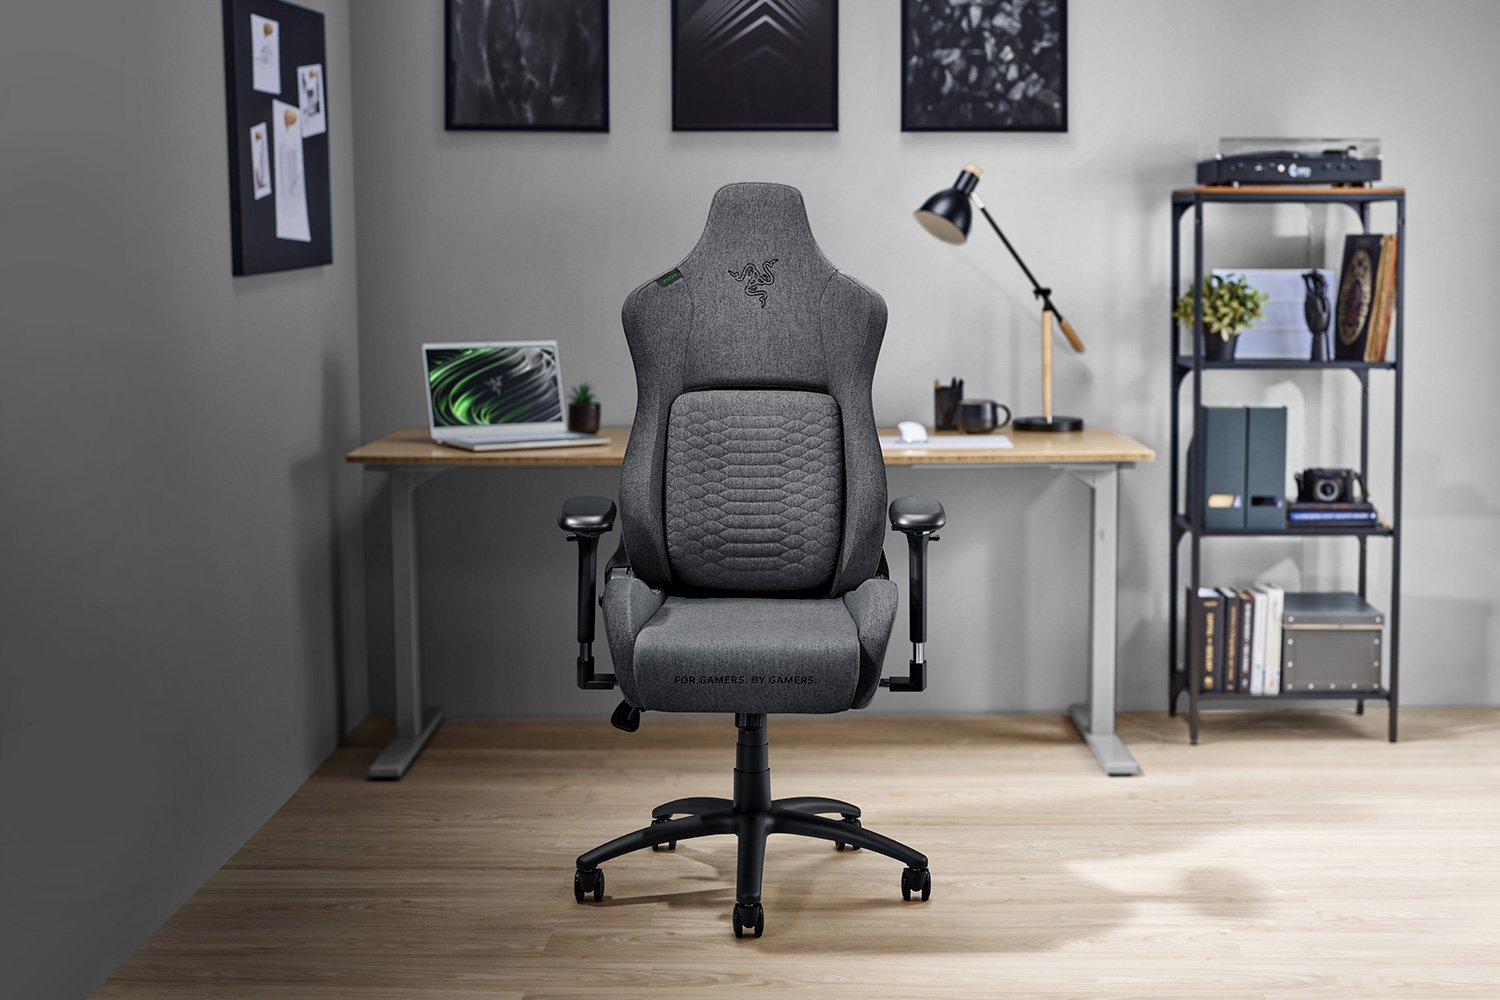 Comfortable Pillows for Gaming Chairs & Office Workers